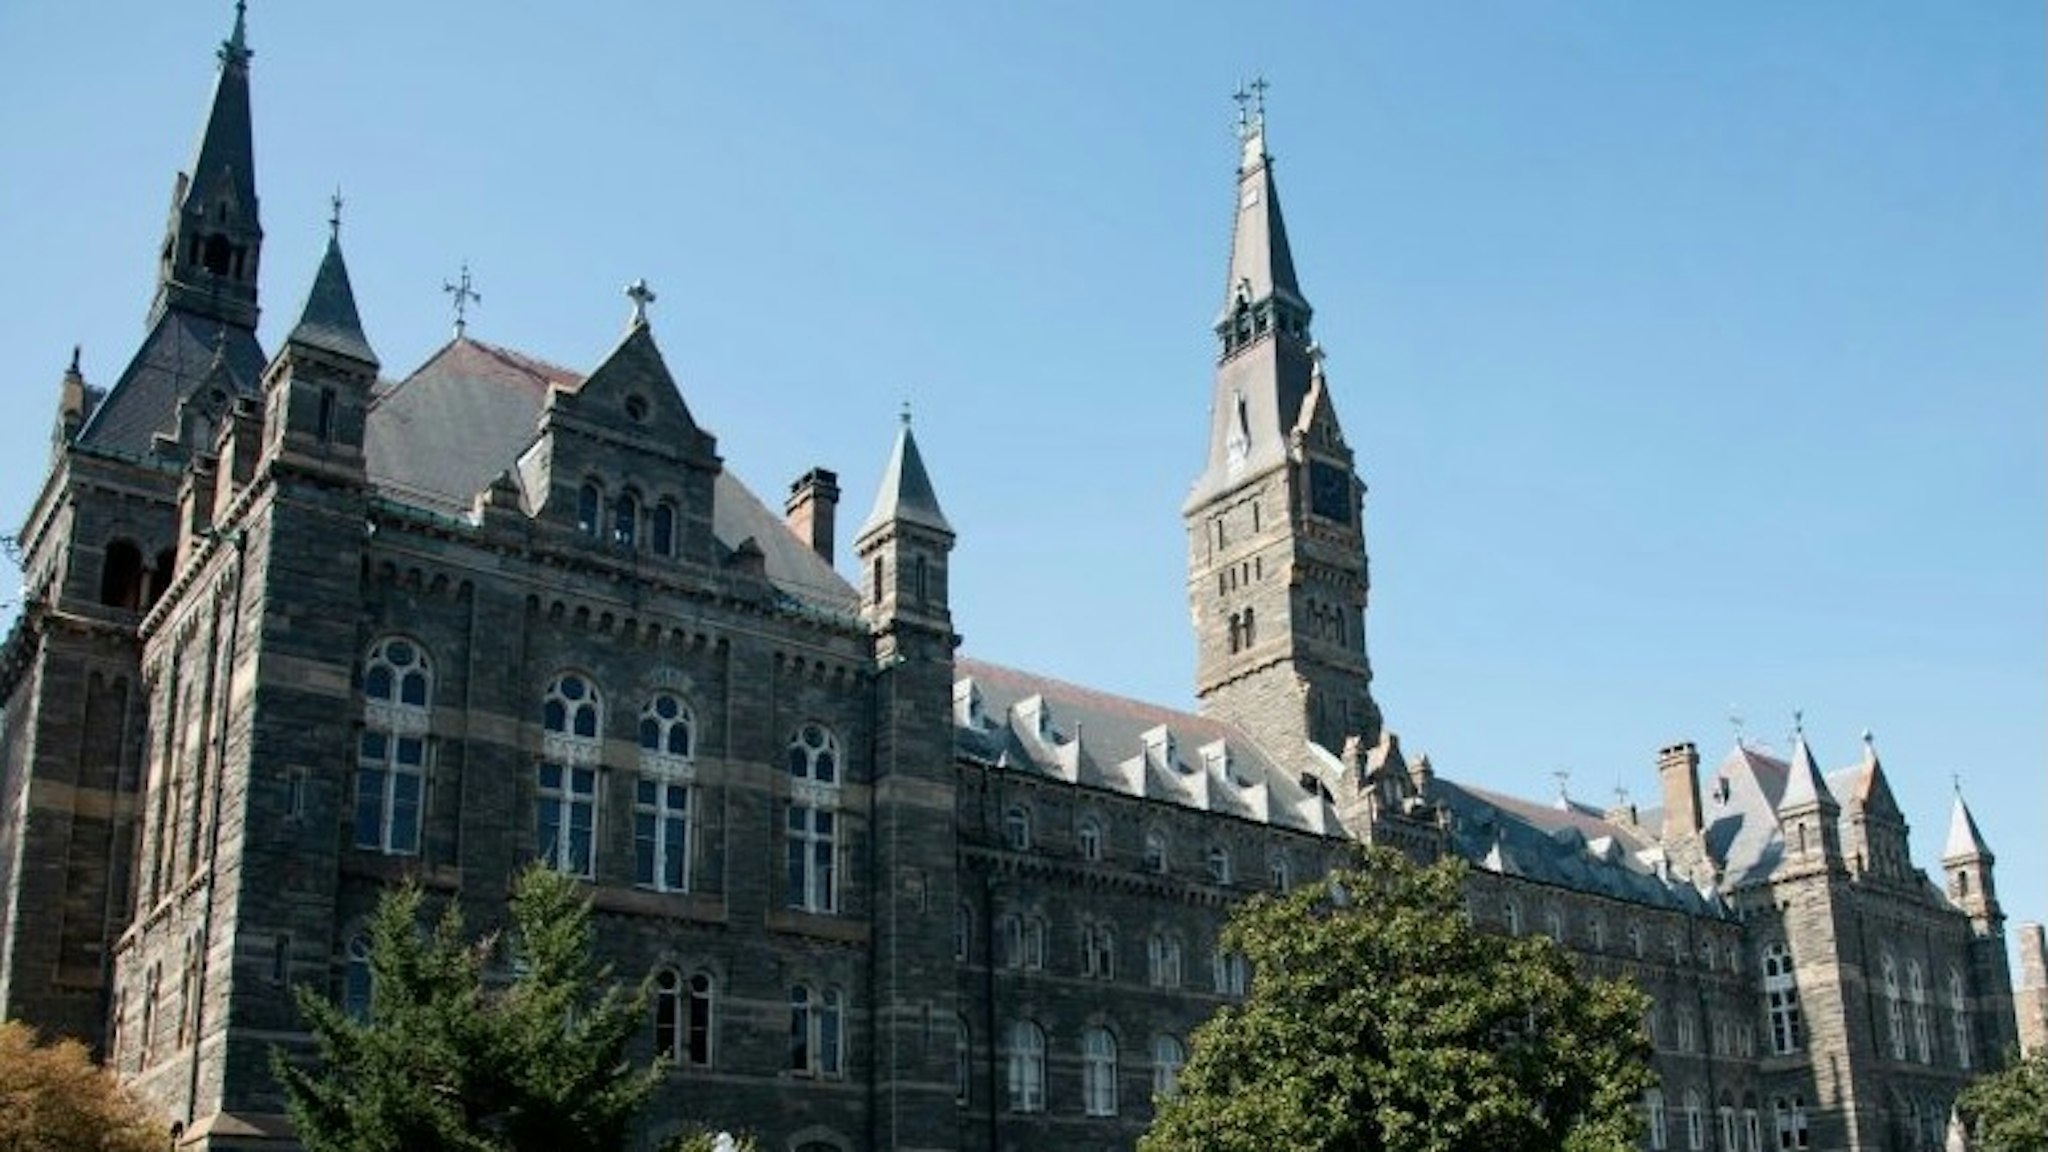 Healy Hall on the campus of Georgetown University, Washington, D.C. (Photo by: Robert Knopes/Universal Images Group via Getty Images)